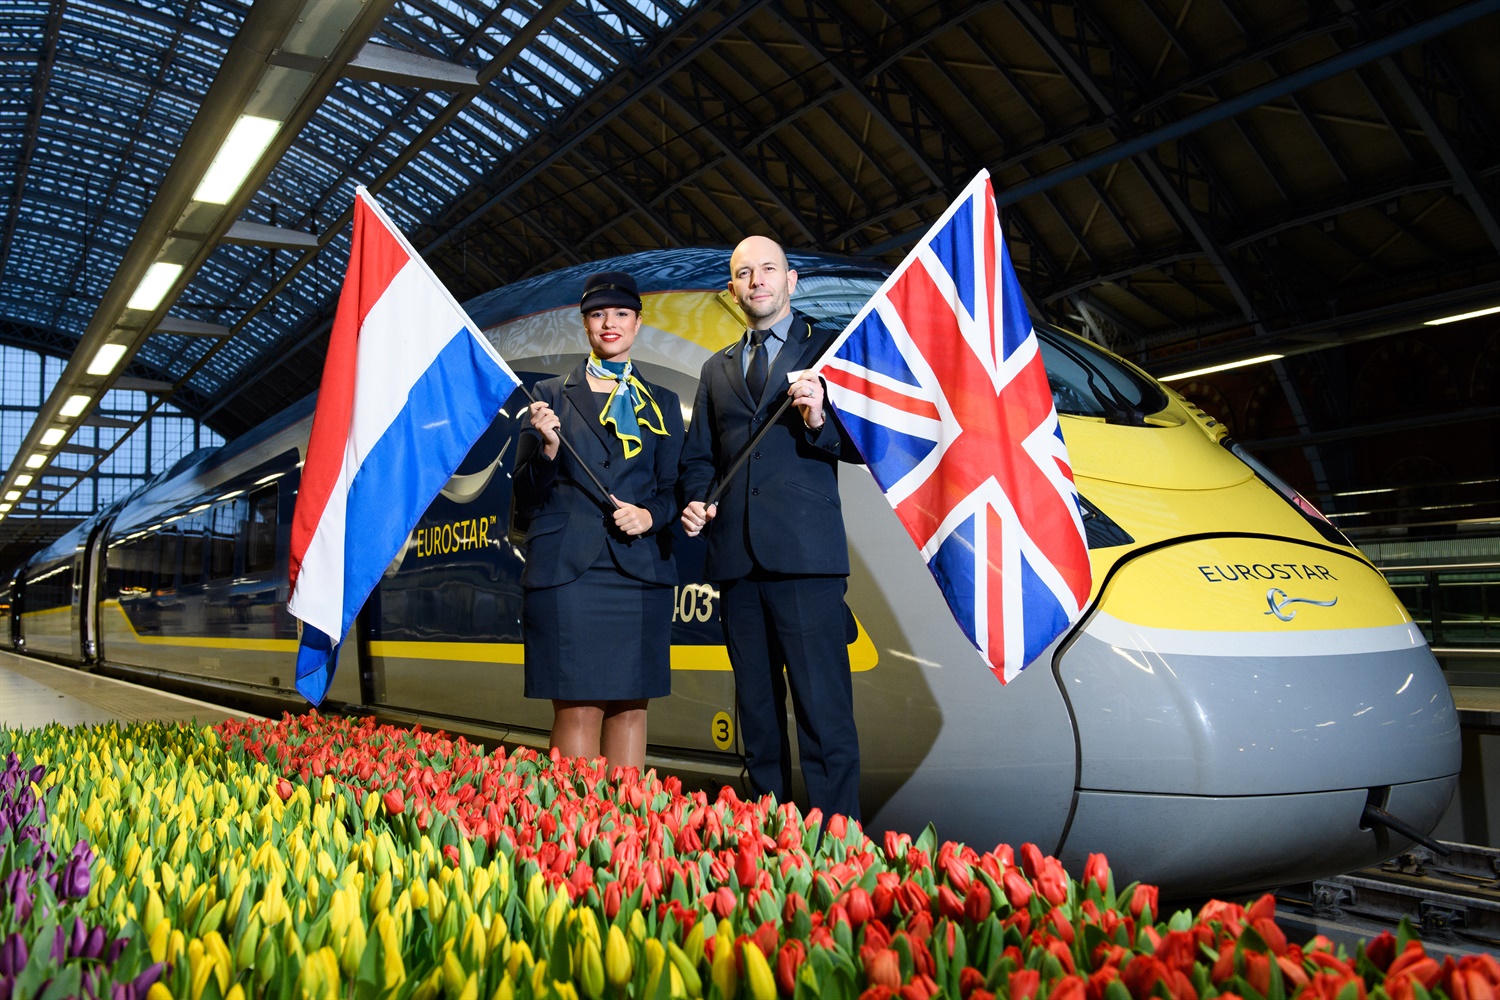 First direct London-Amsterdam service marks ‘exciting new chapter’ for Eurostar